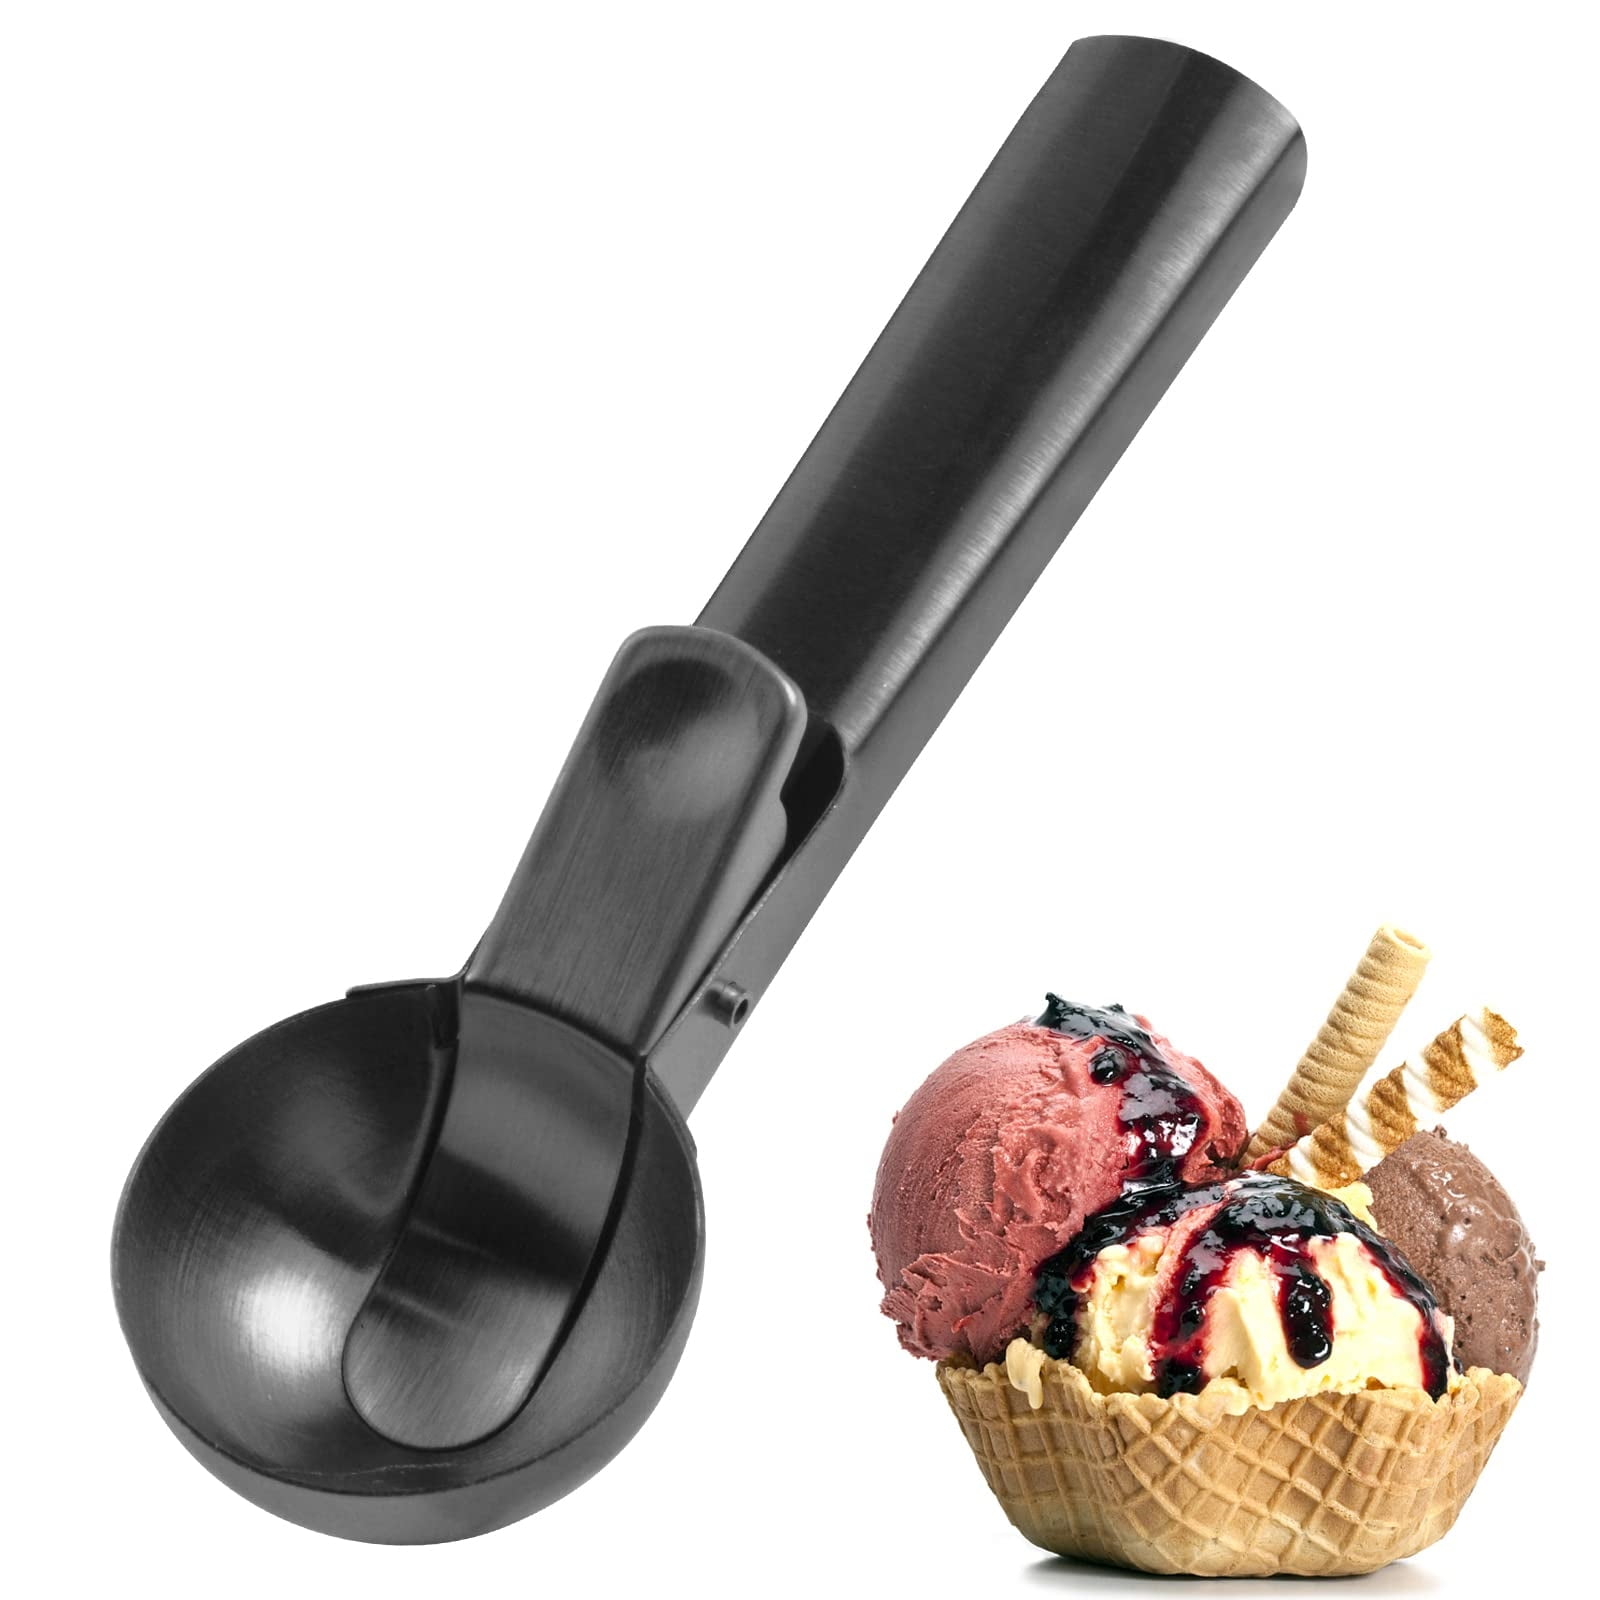 Stainless Steel Ice Cream Scoop with Trigger Lever and Yellow Grip